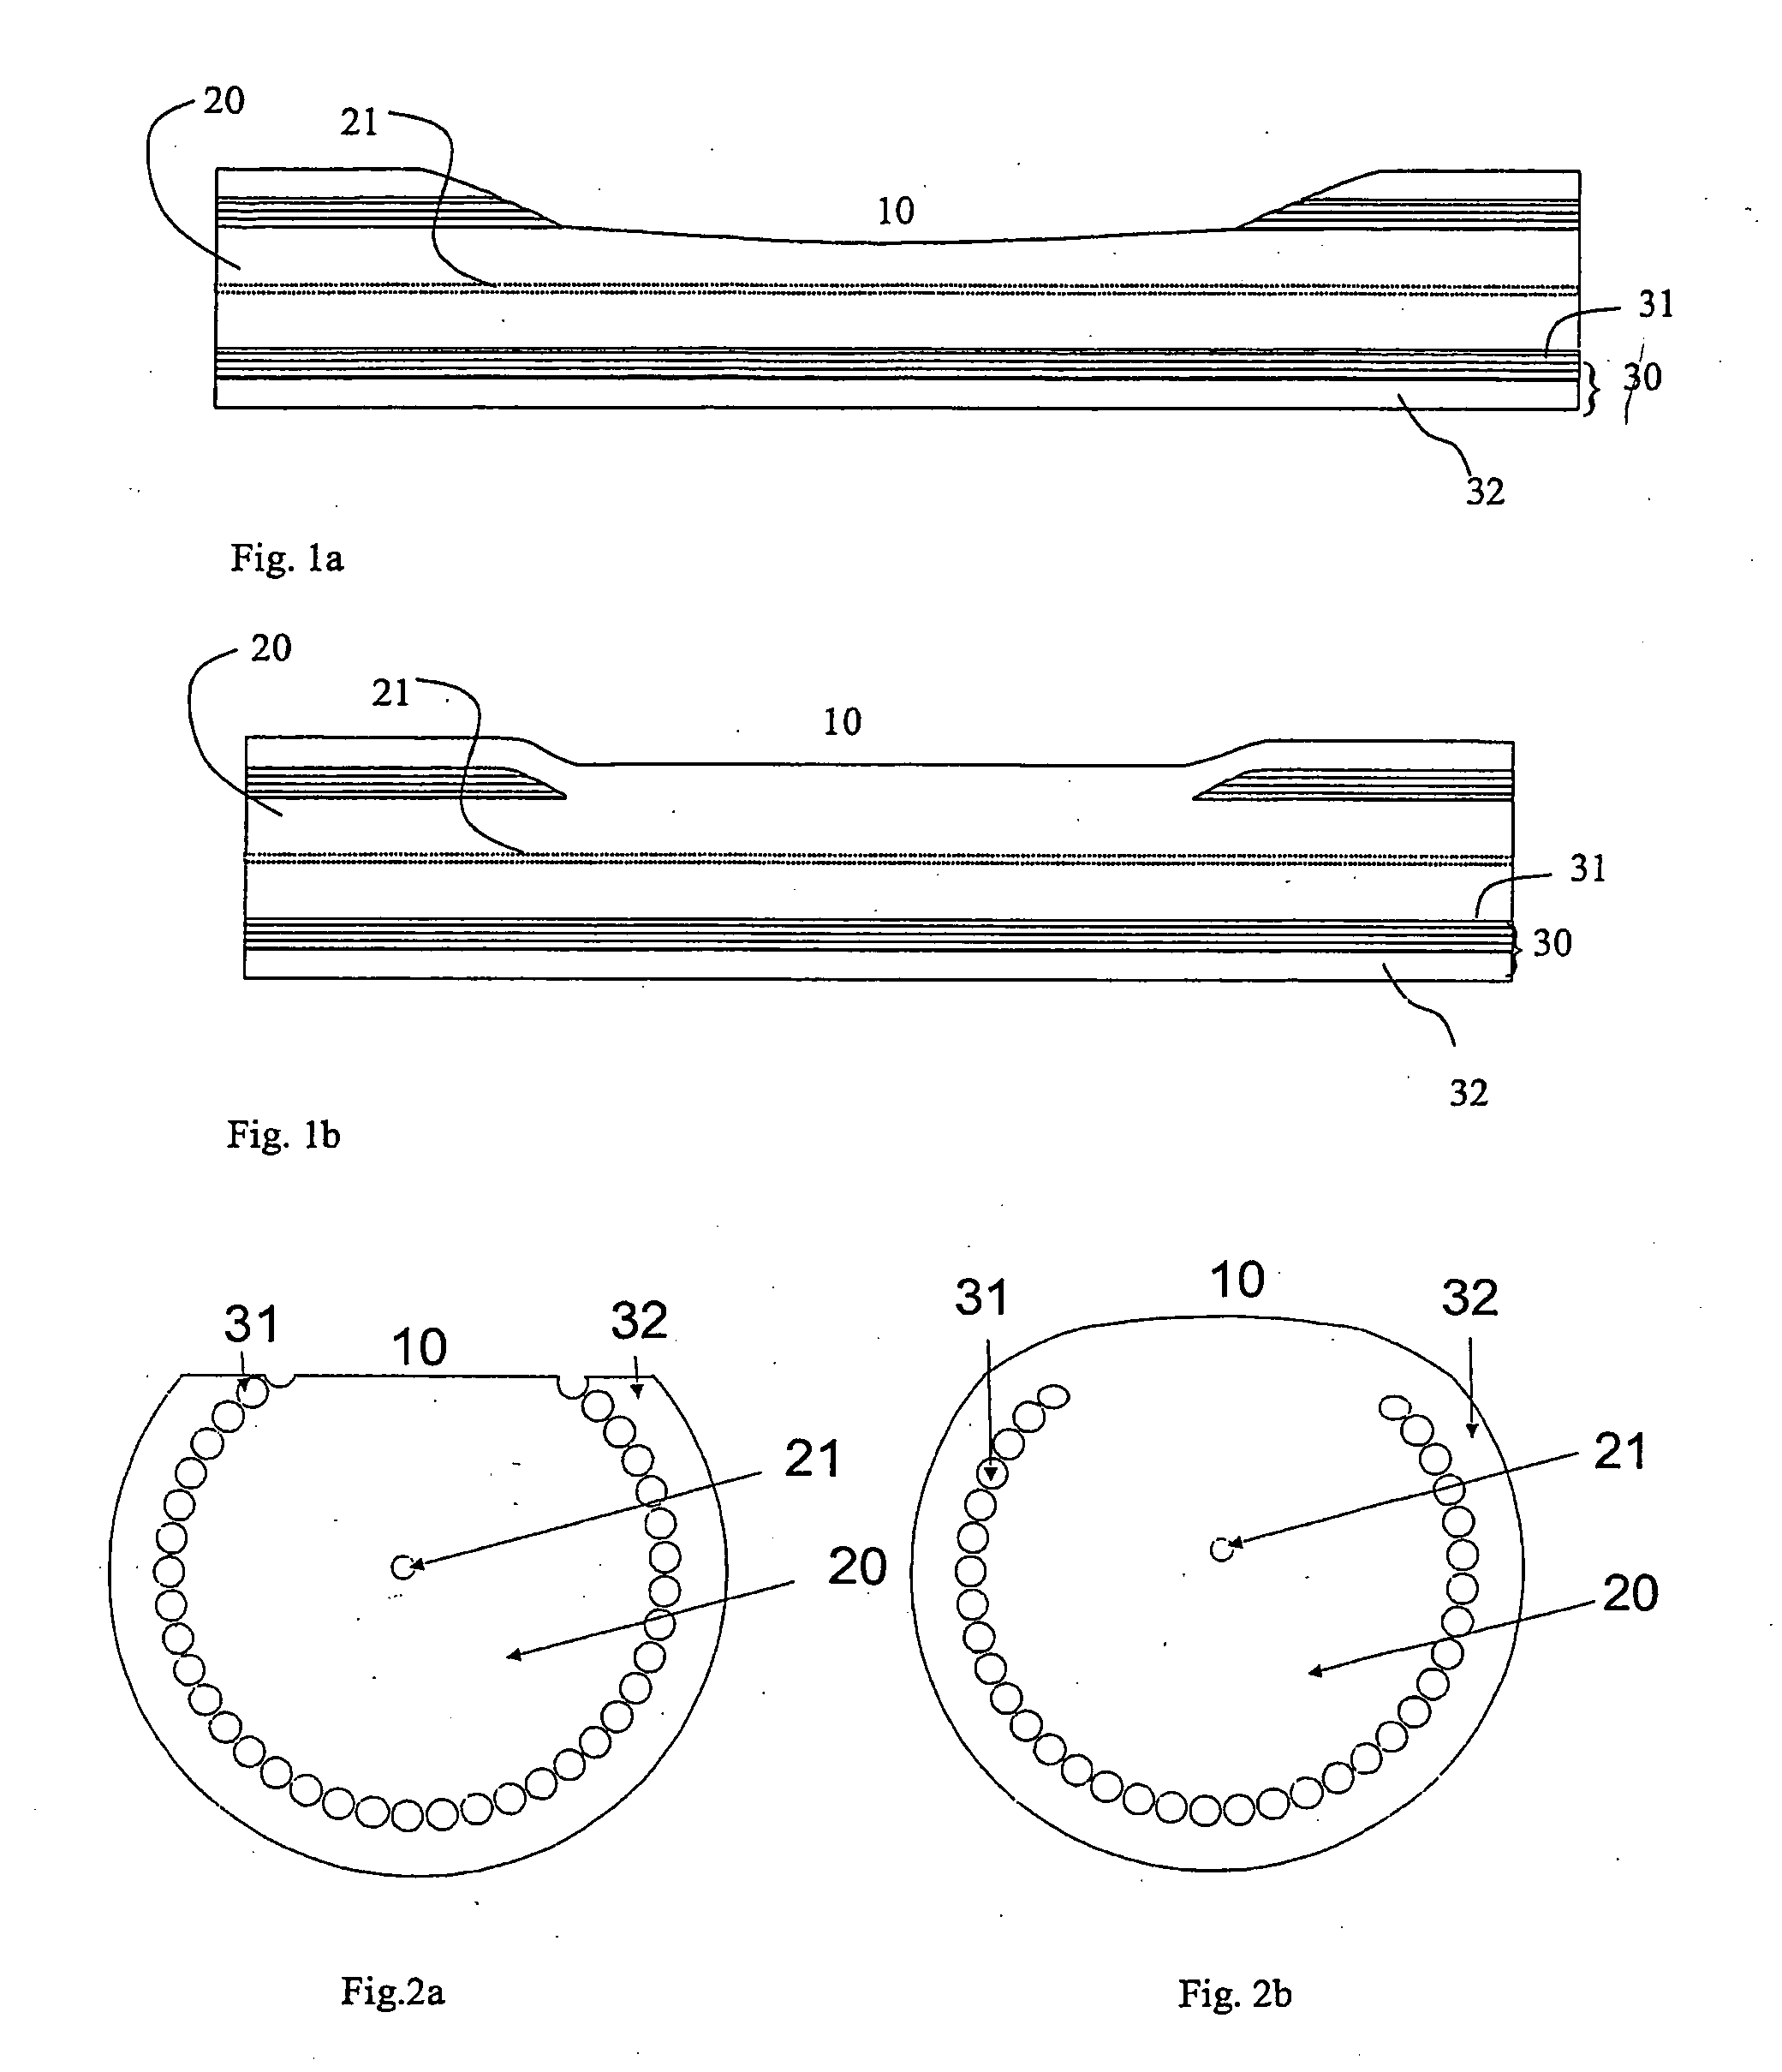 Microstructured optical fibre with cladding recess, a method of its production, and apparatus comprising same